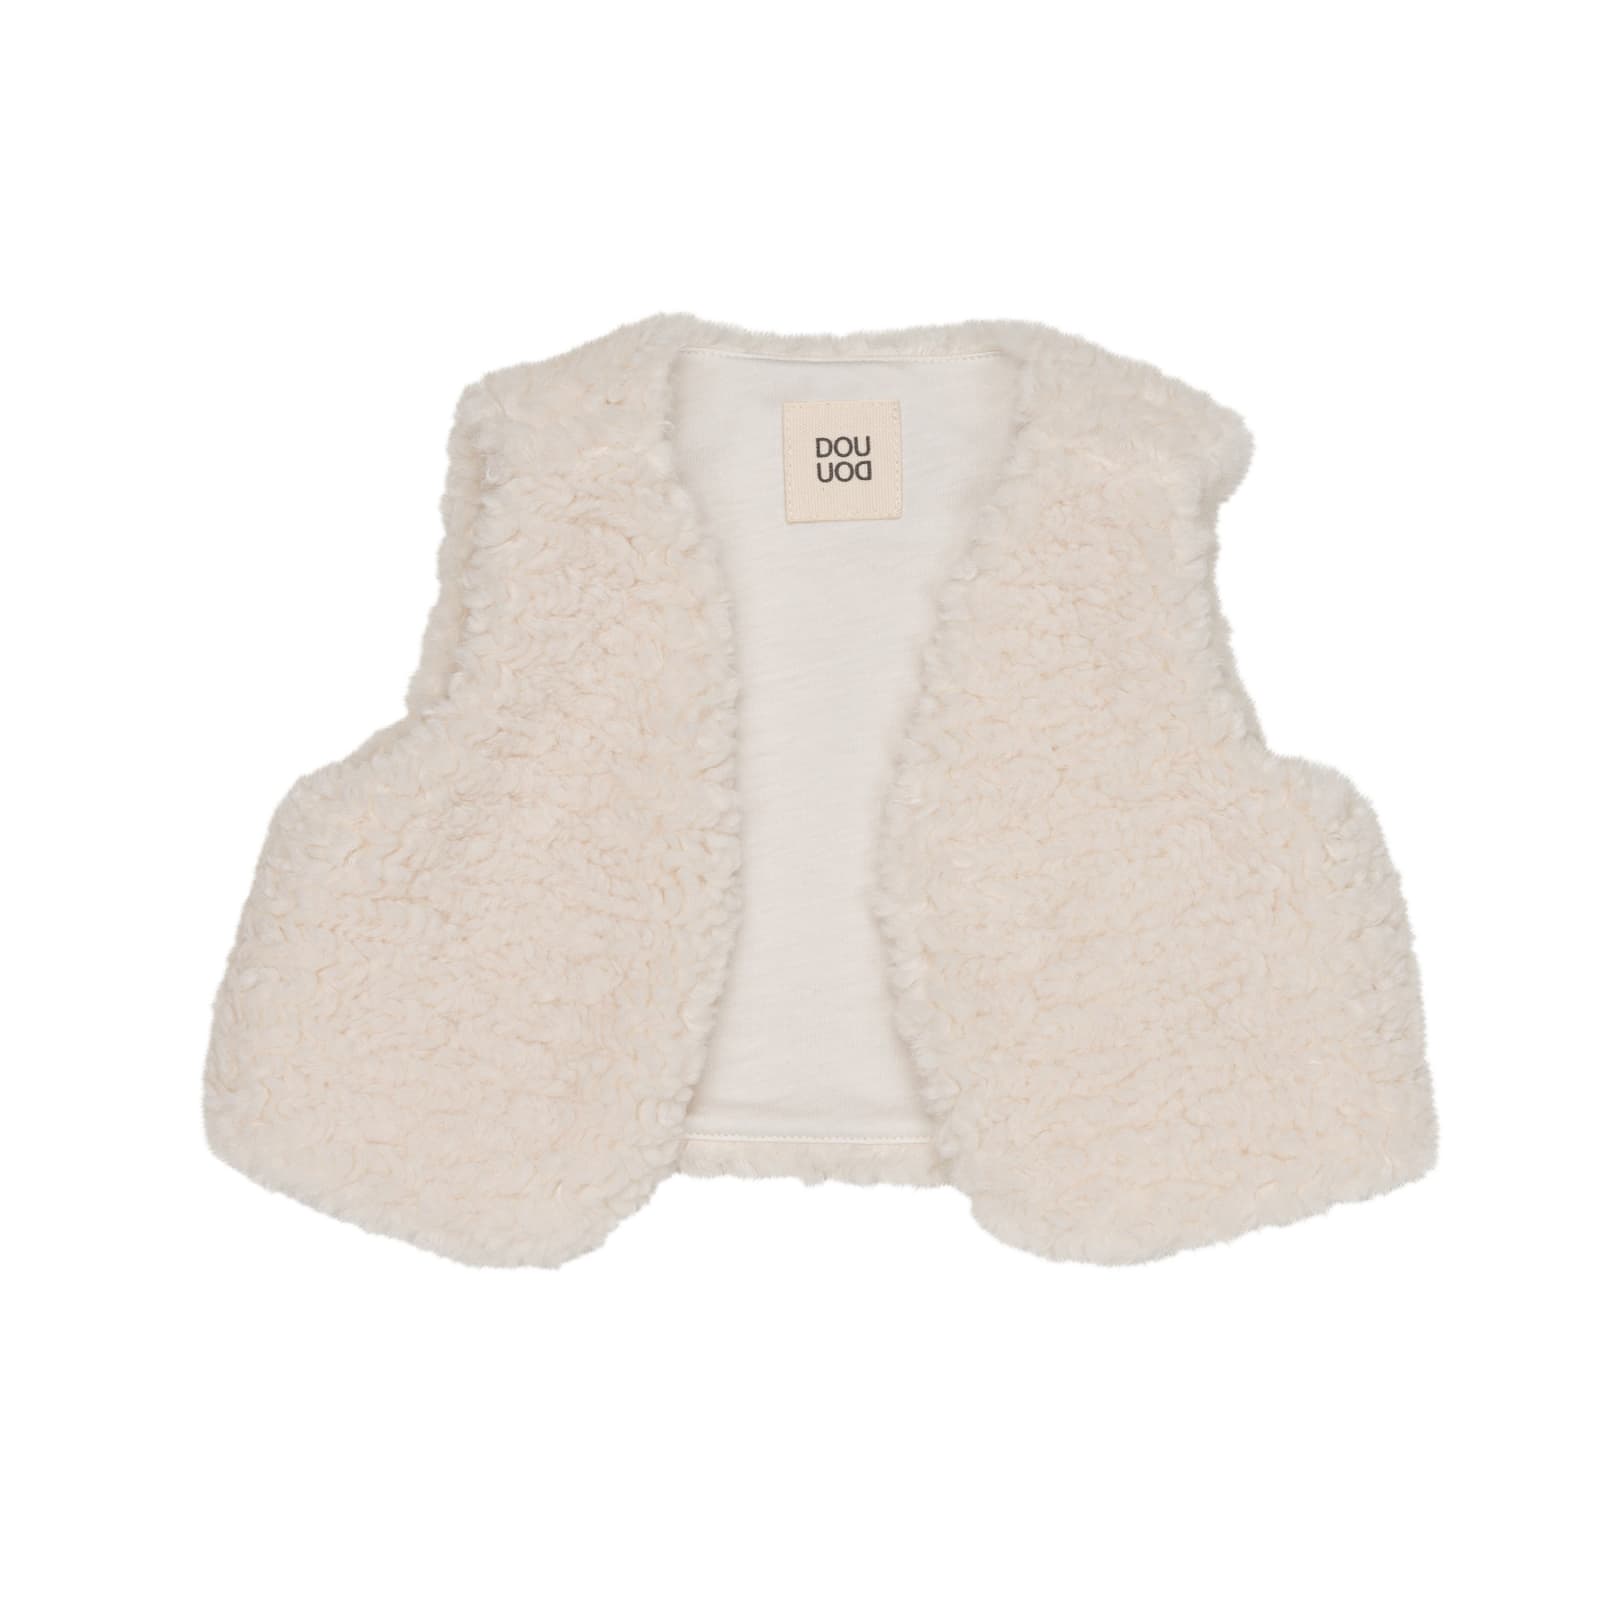 Douuod Kids' Brushed Effect Cotton Gilet In Crema